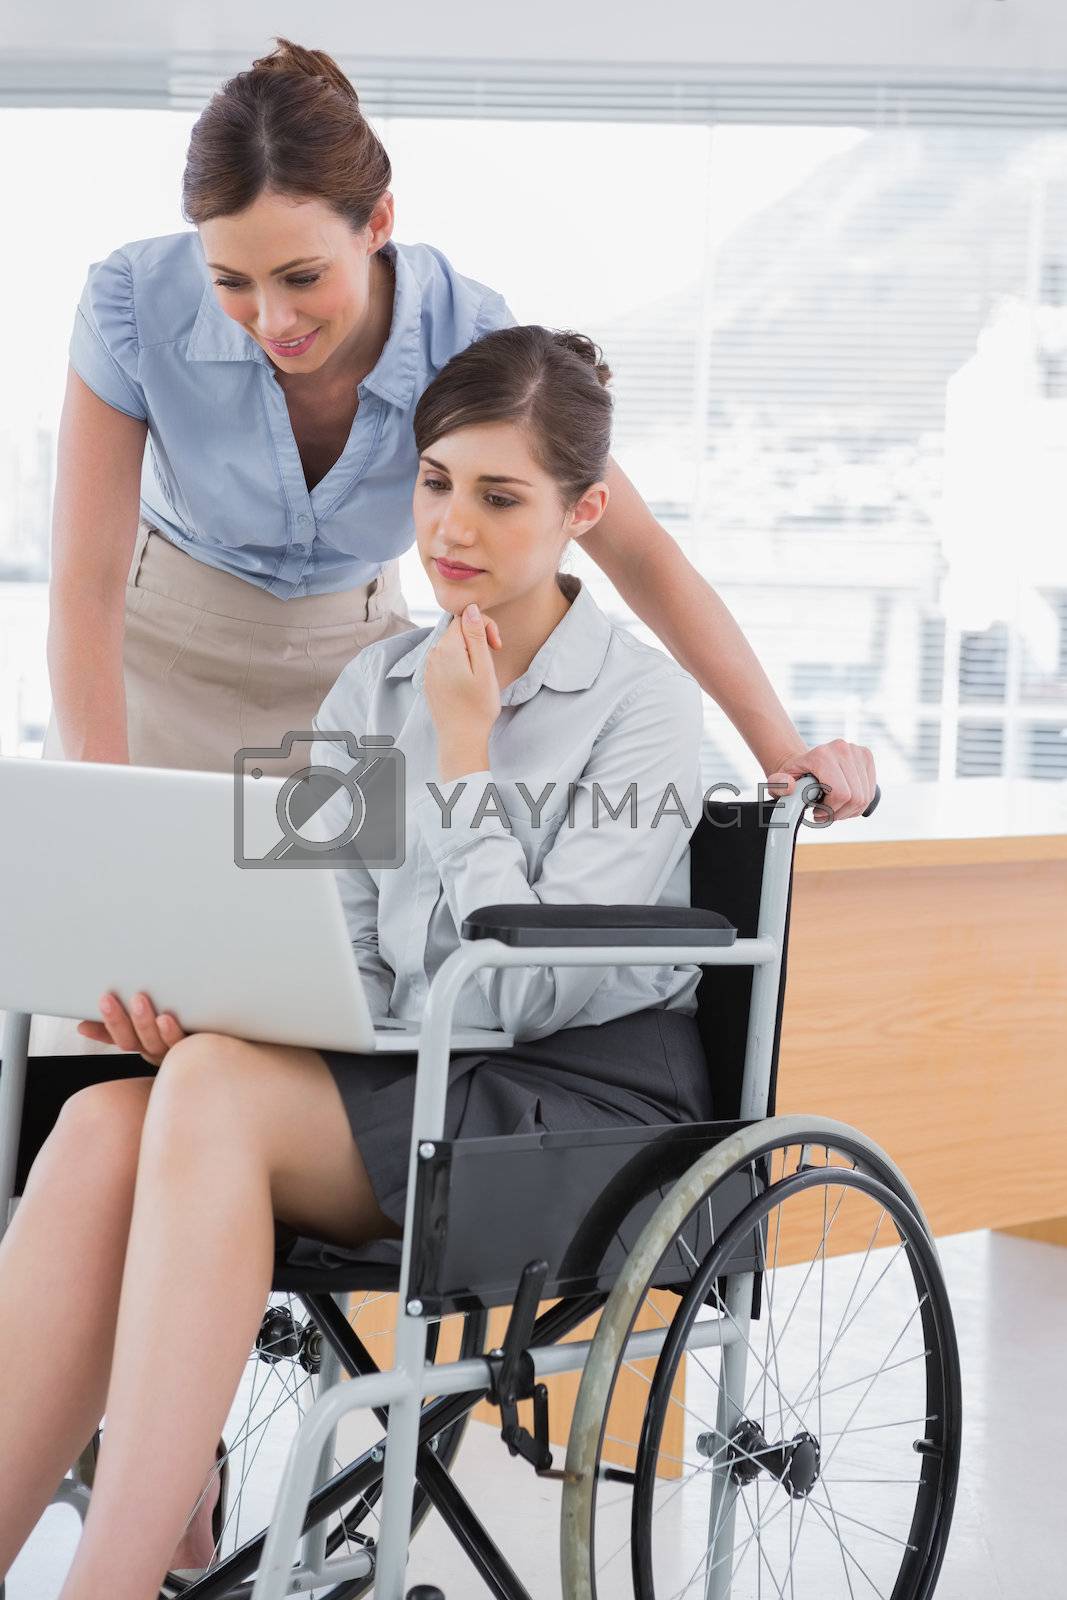 Royalty free image of Disabled businesswoman looking at laptop with her colleague by Wavebreakmedia